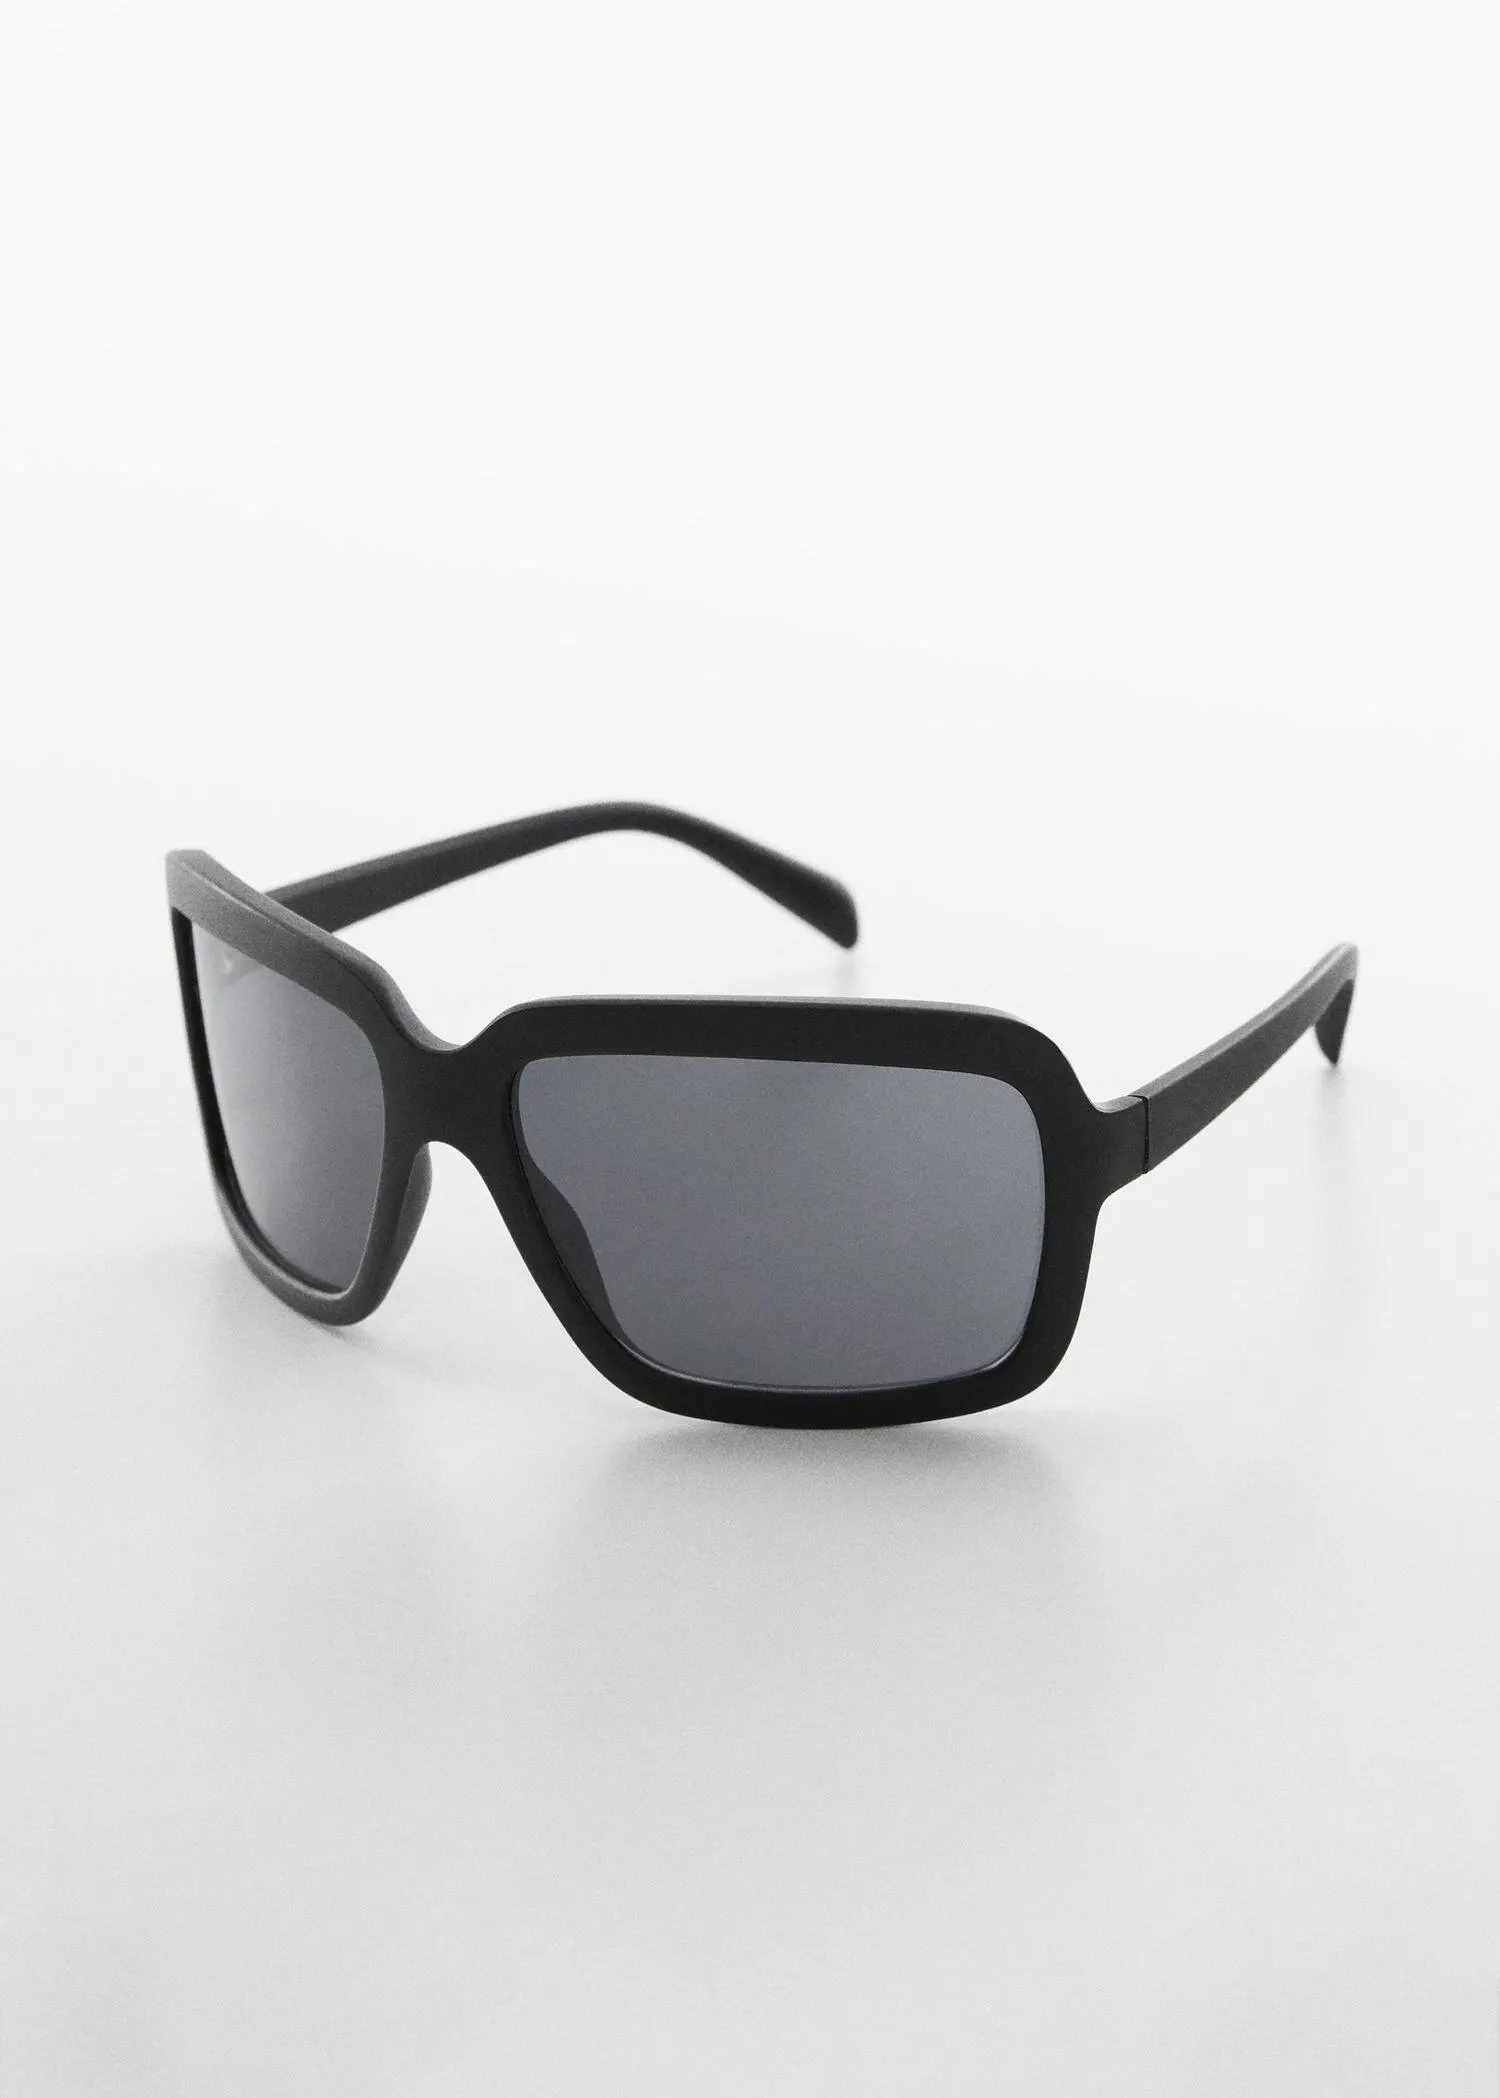 Mango Squared frame sunglasses. a pair of sunglasses on a white surface. 